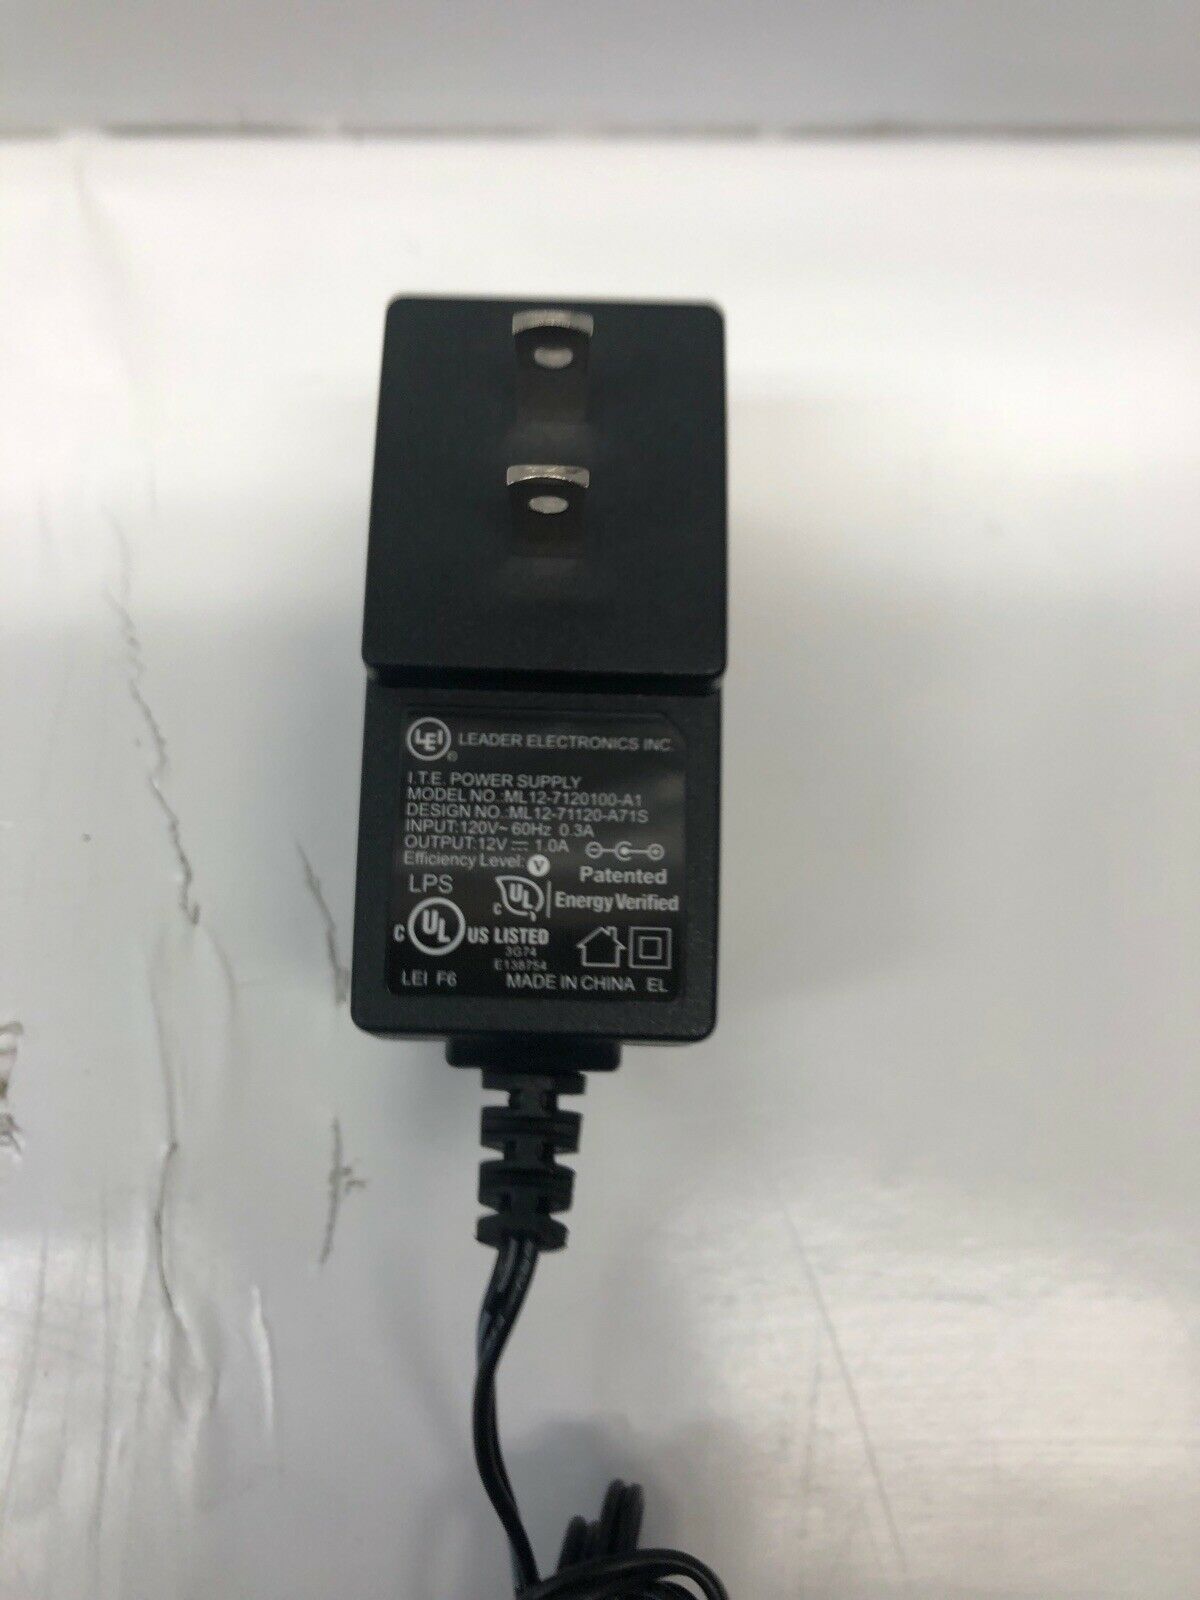 LE ML12-7120100-1A · ITE Pwr Sply · 12.0V 1A for ATA Audiocodes Obihai 300 302 Product Type: Power Supply Adapter I